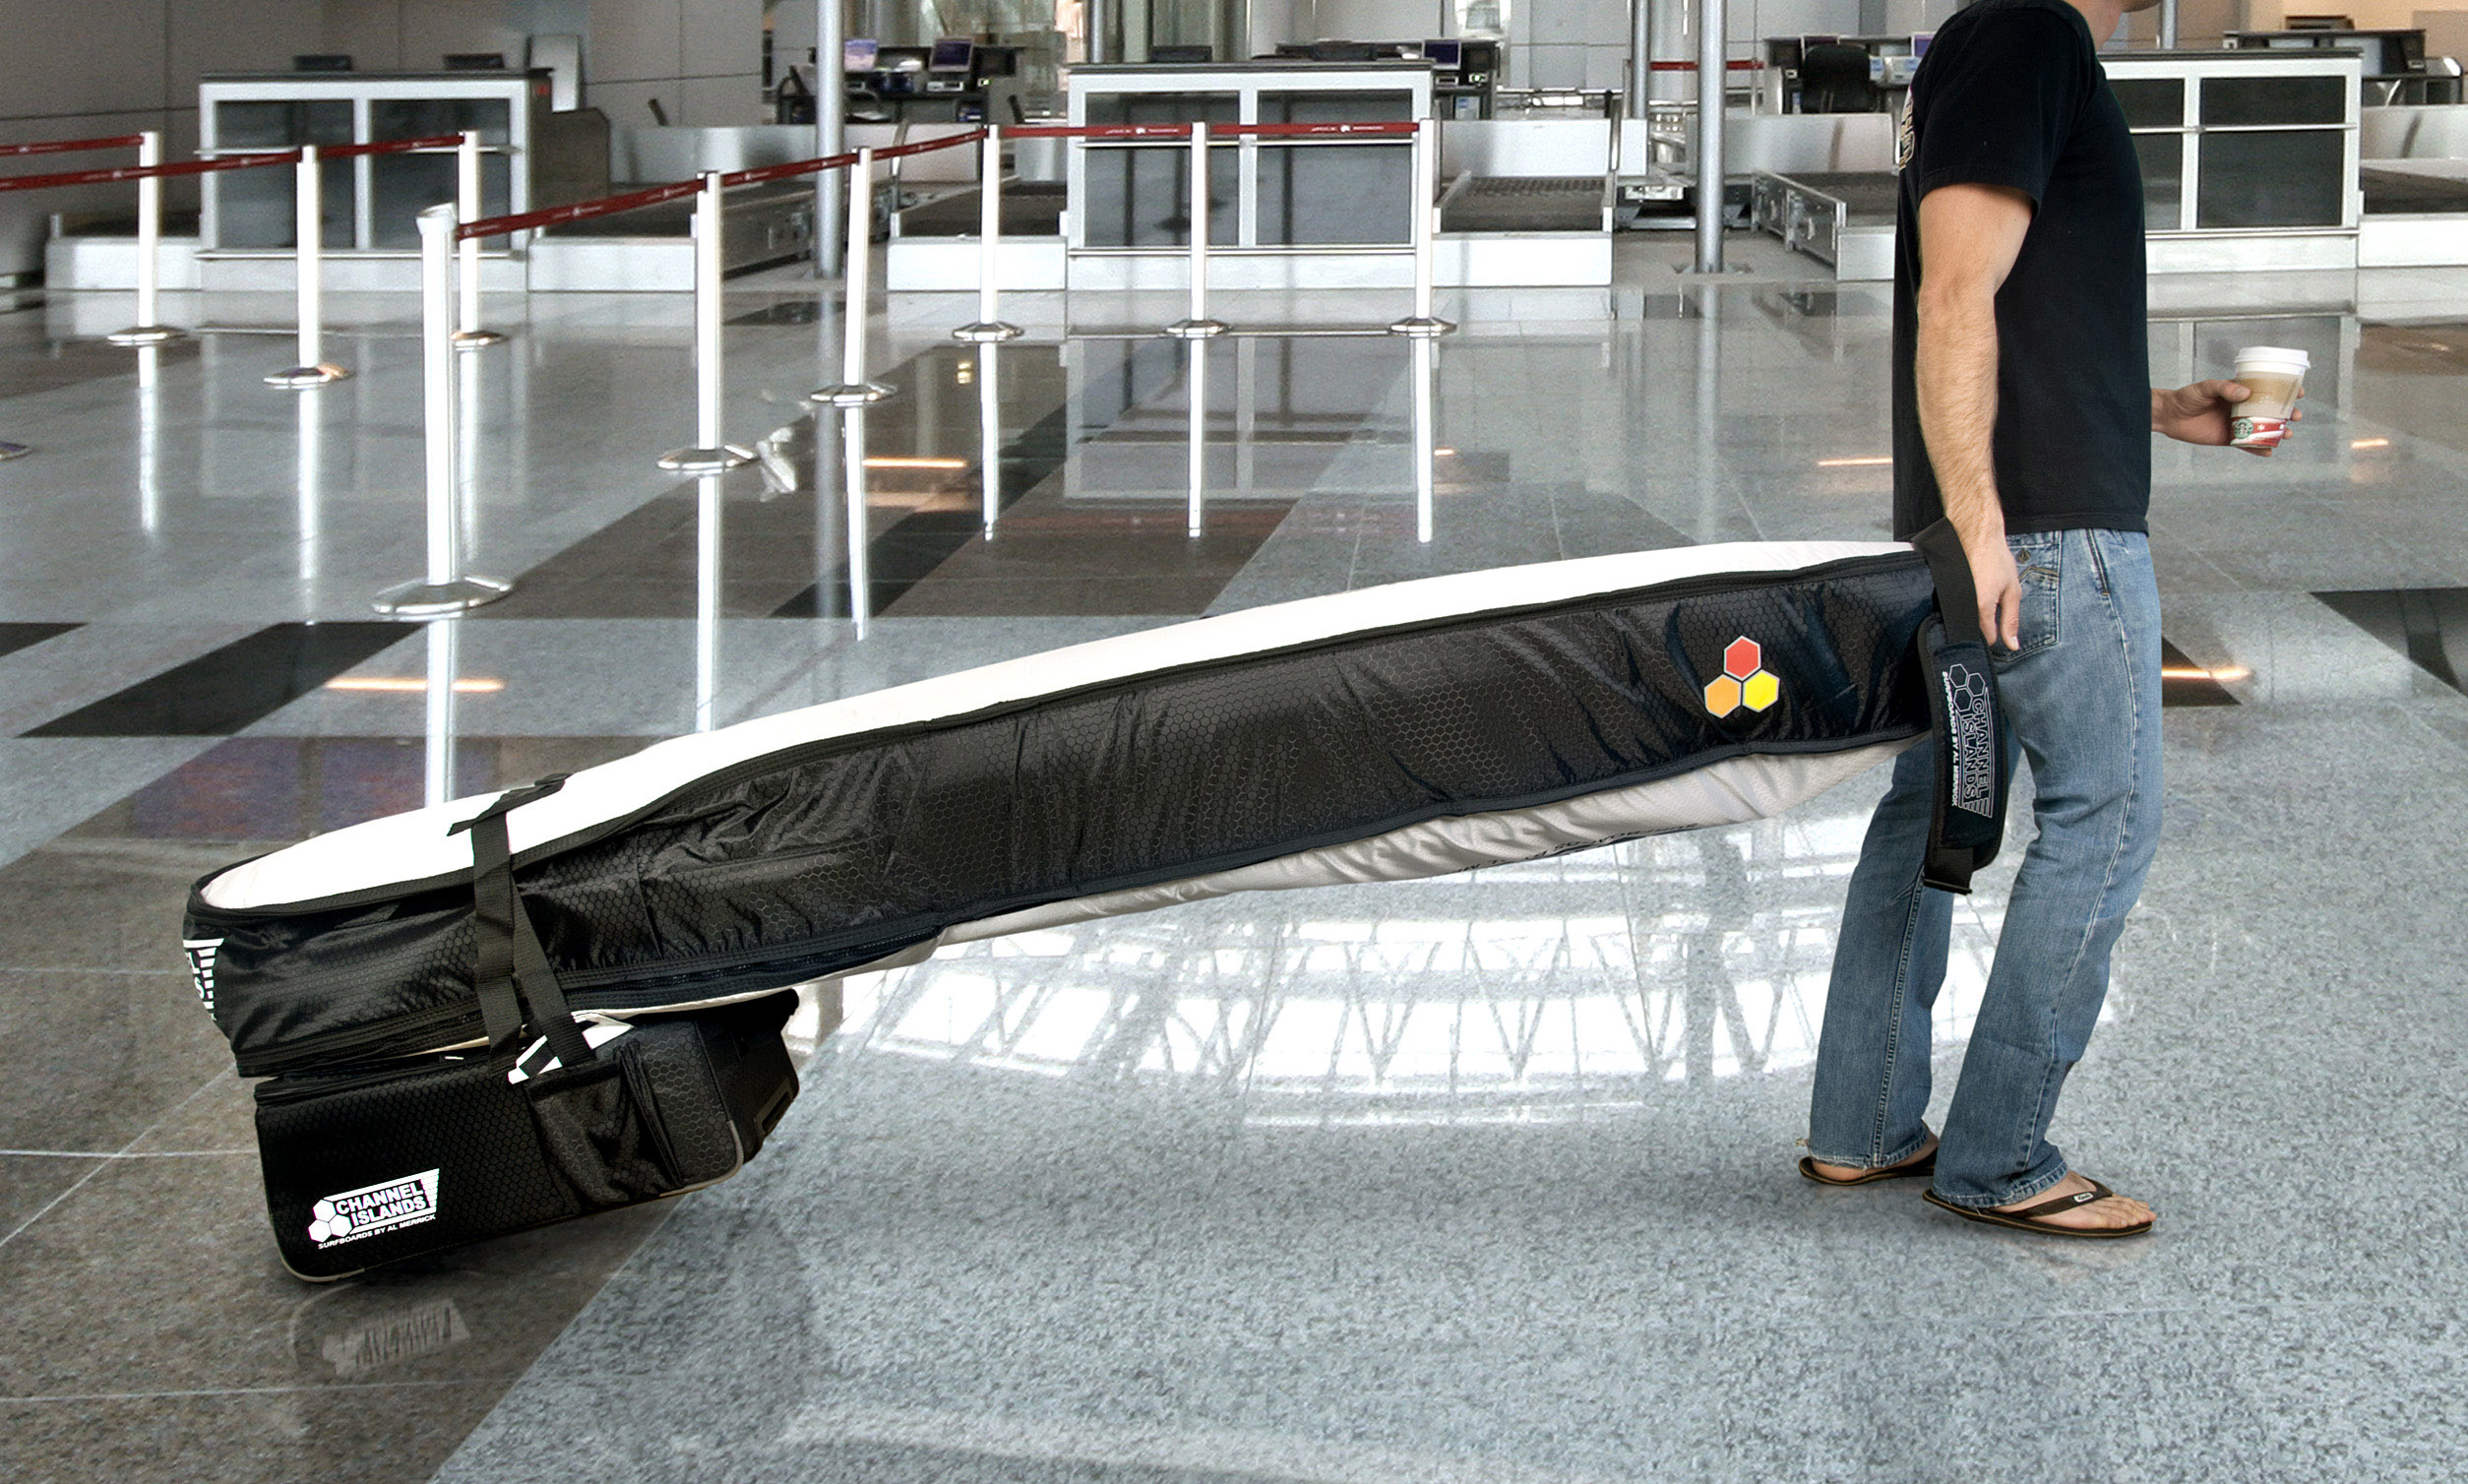 Surfboard Bags: The Channel Islands Travel Light Coffin and Carry On wheelie bag